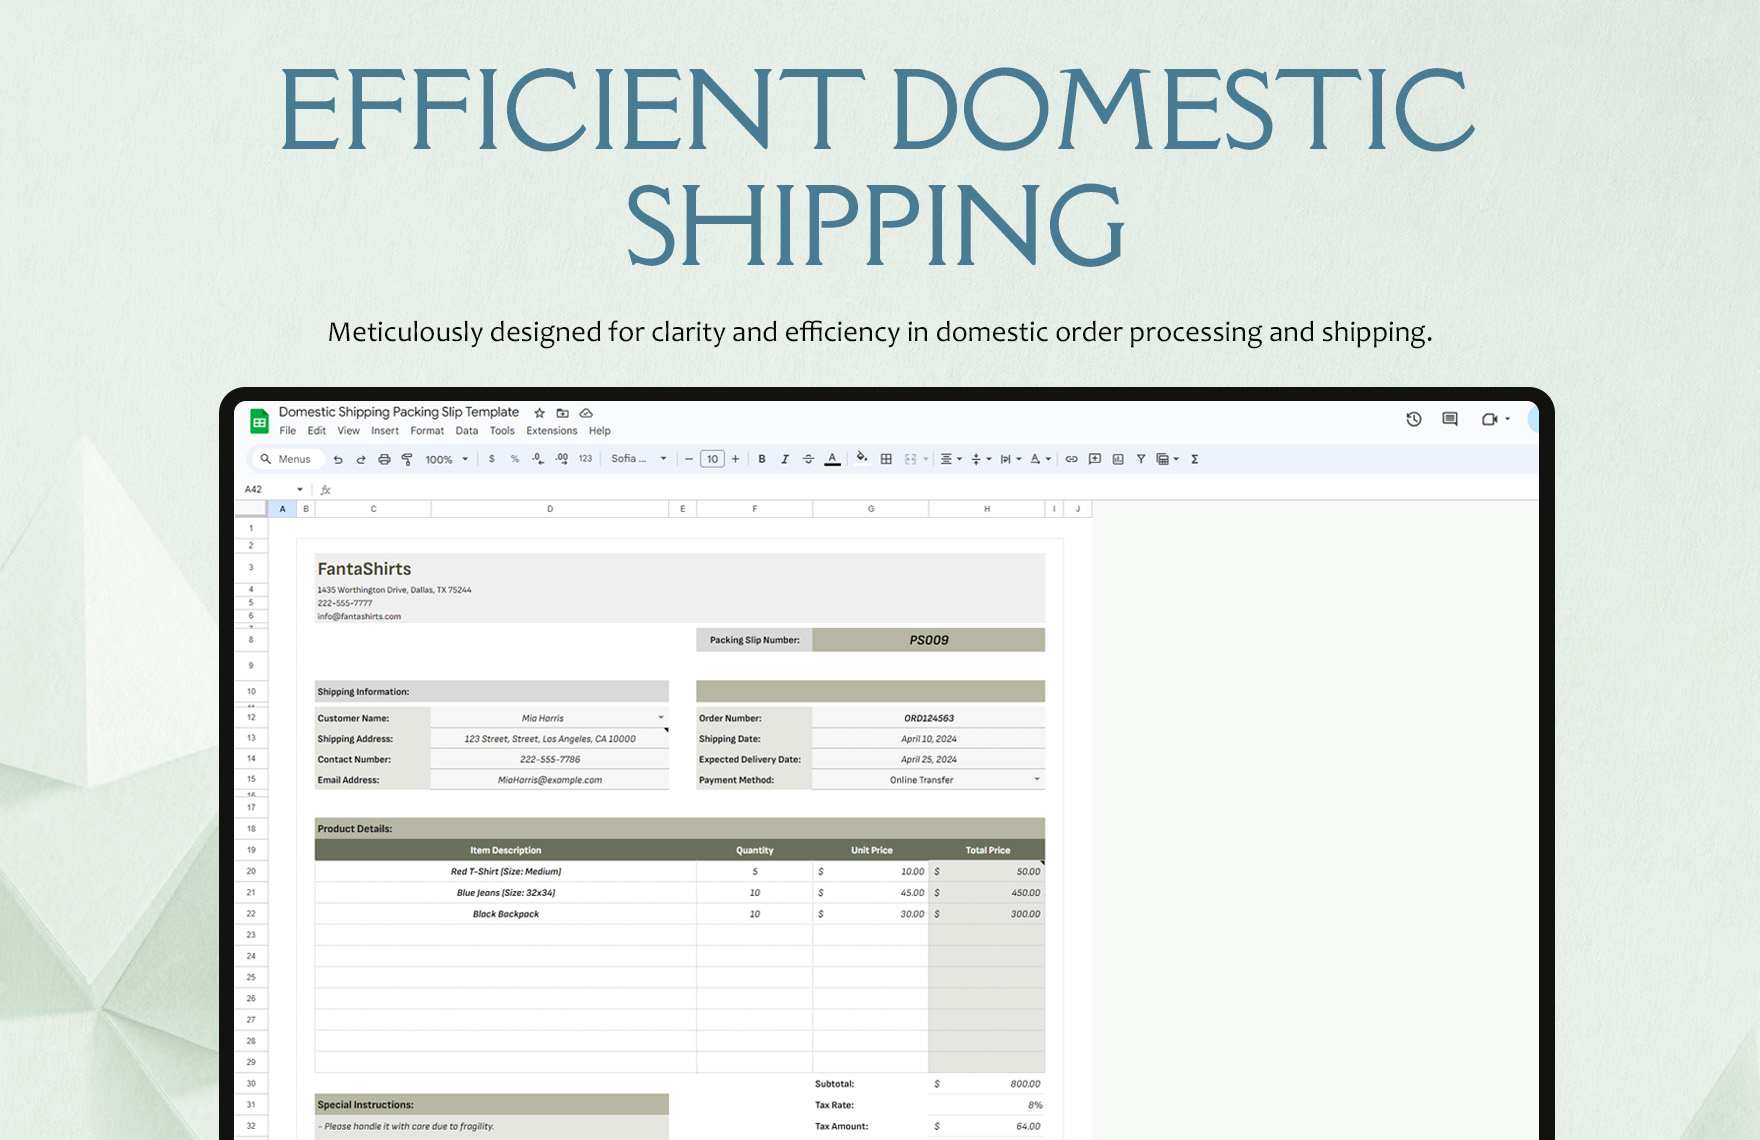 Domestic Shipping Packing Slip Template